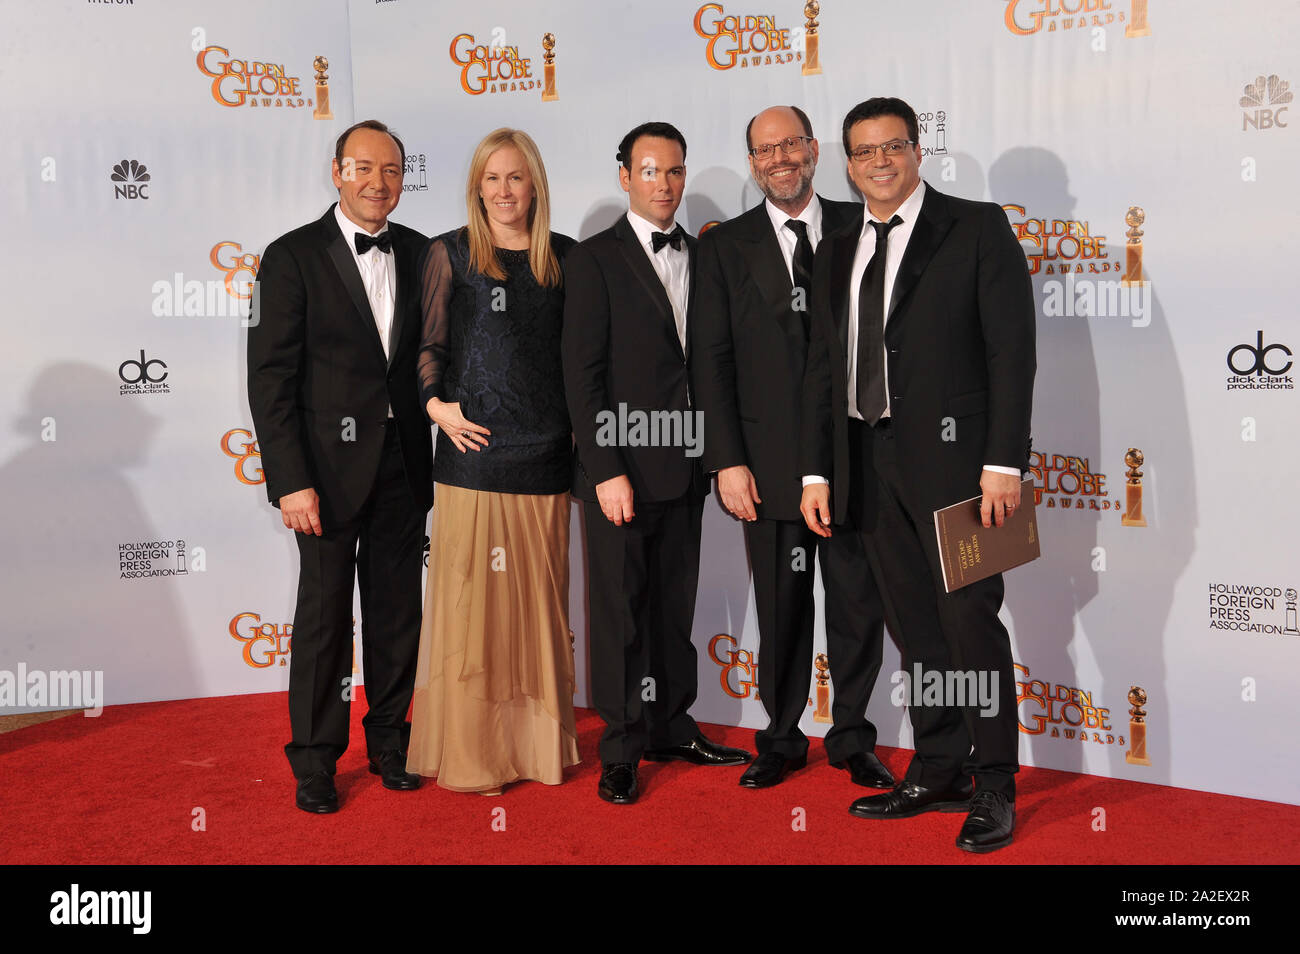 LOS ANGELES, CA. January 16, 2011: The Social Network producers Kevin Spacey, Cean Chaffin, David Brunetti, Scott Rudin and Micahel DeLuca at the 68th Annual Golden Globe Awards at the Beverly Hilton Hotel. © 2011 Paul Smith / Featureflash Stock Photo